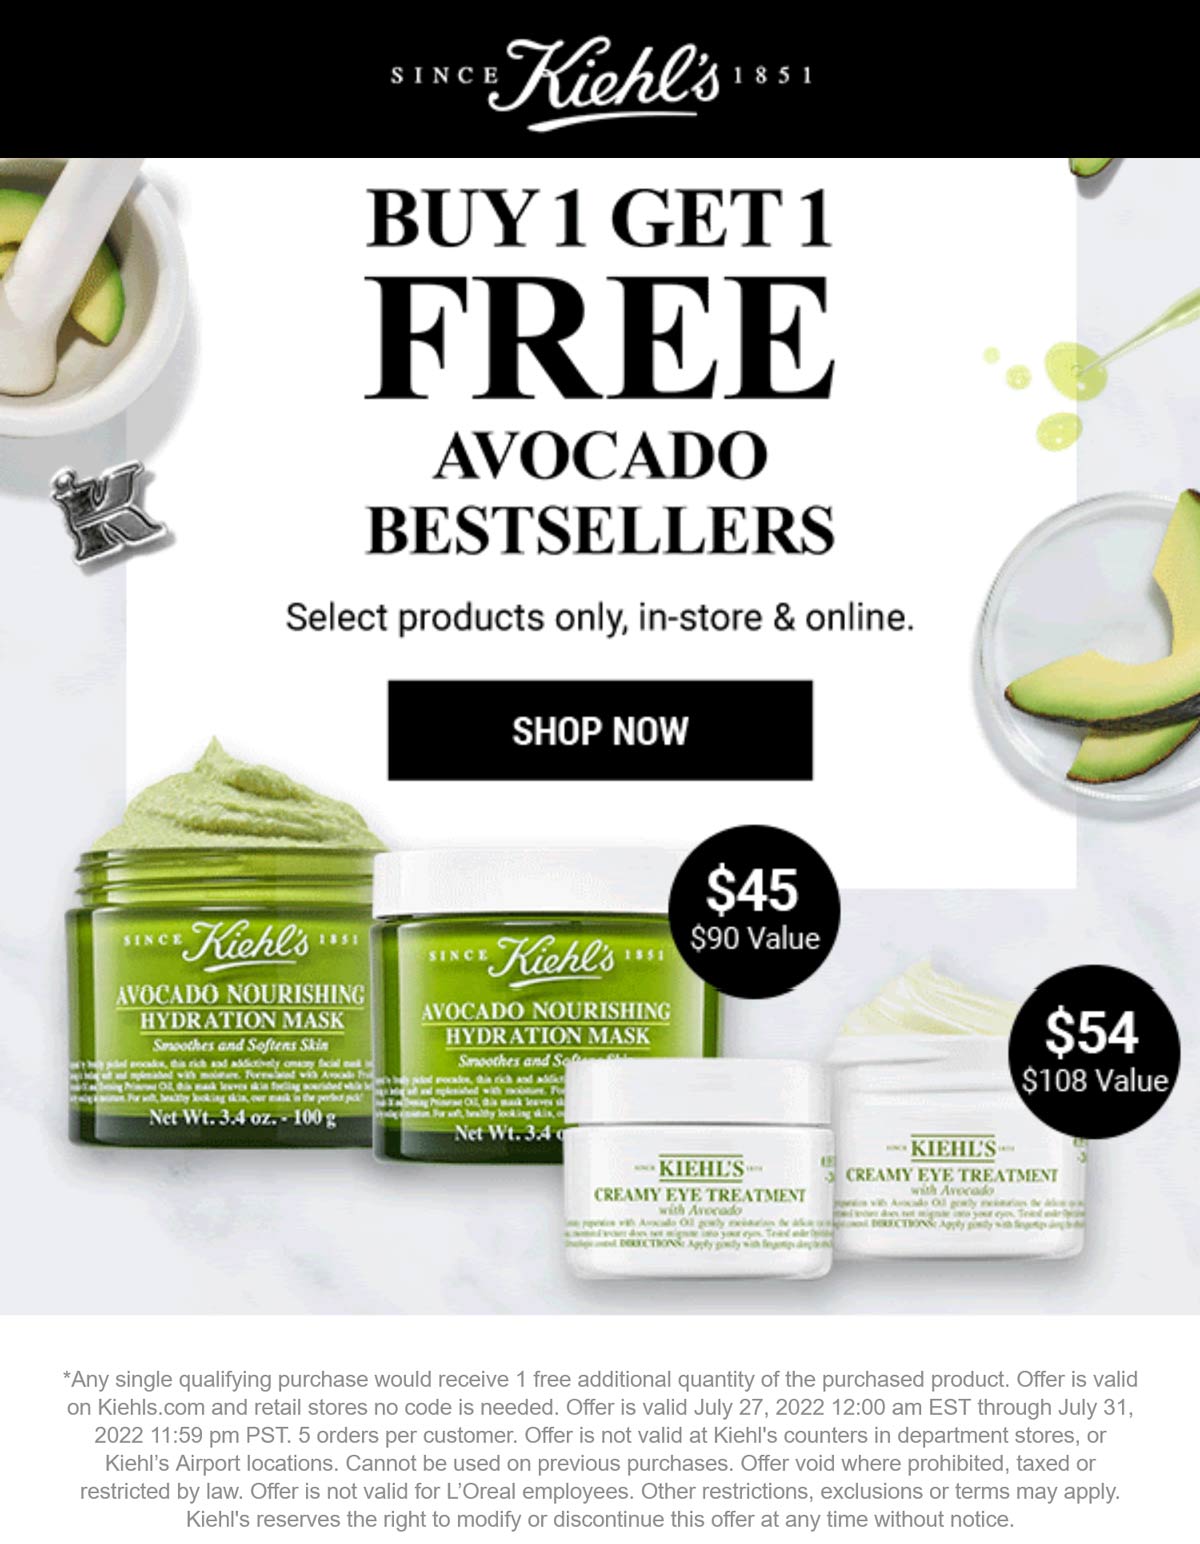 Kiehls stores Coupon  Second avocado bestseller free at Kiehls, ditto online #kiehls 